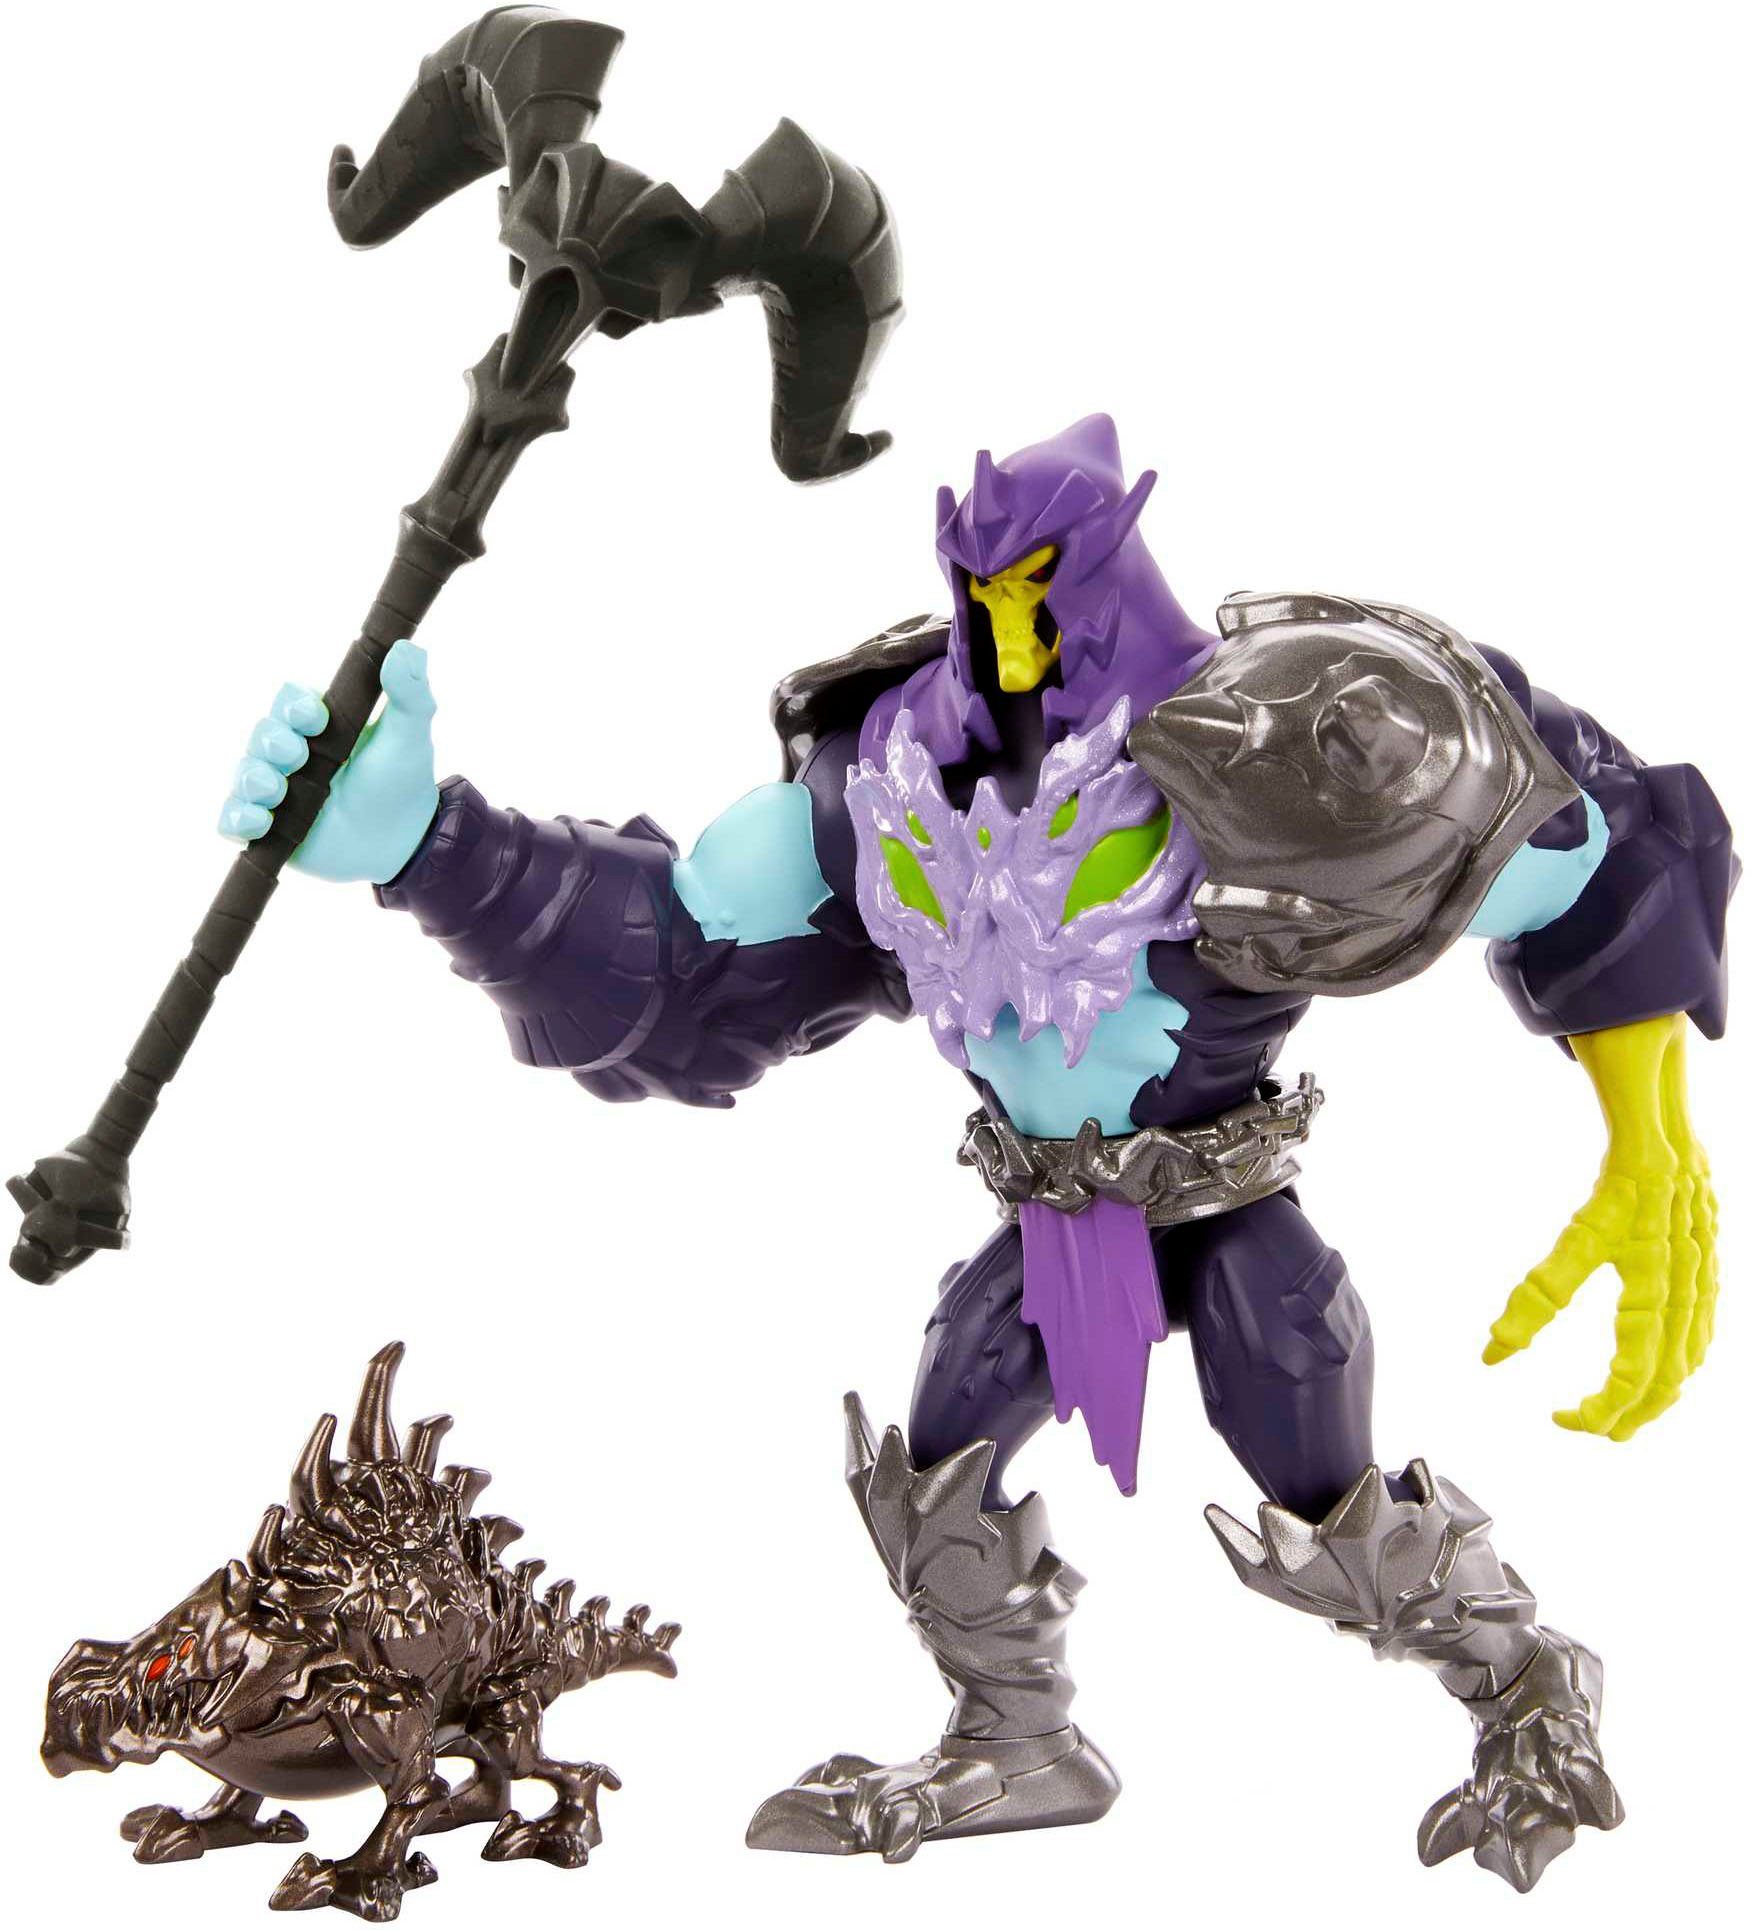 Mattel® Actionfigur He-Man and The Savage the Masters of Eternia, Skeletor Universe